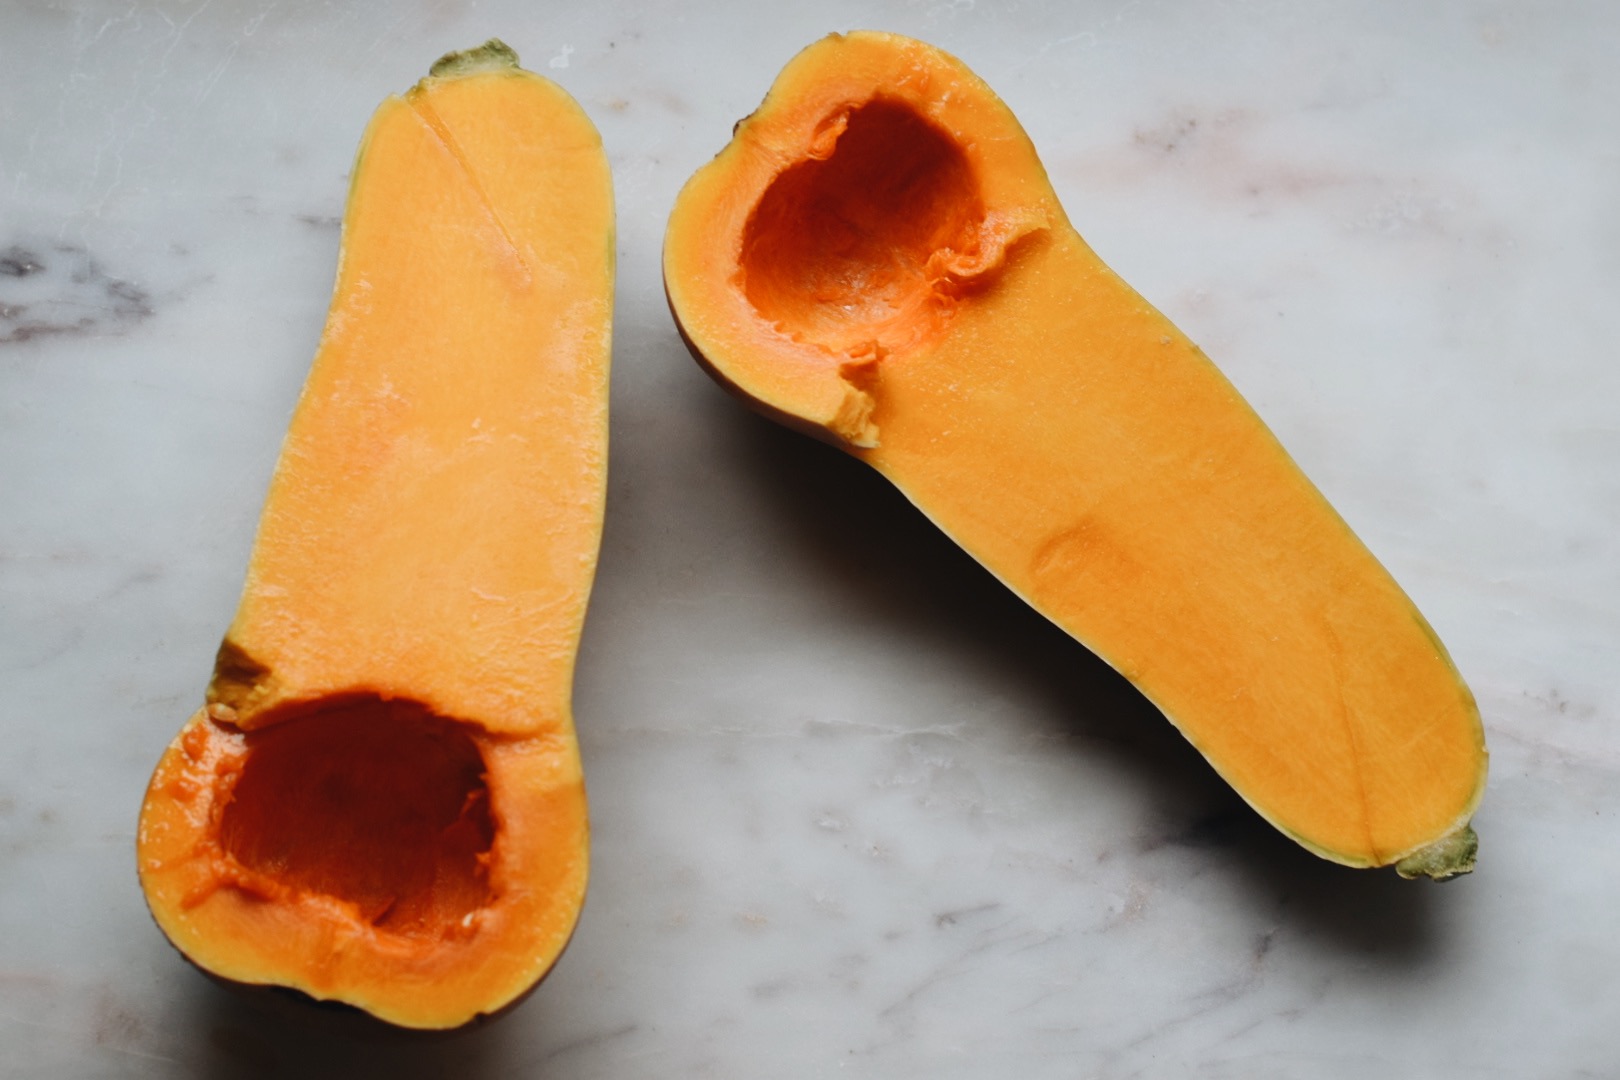 butternut squash cut in half on a white surface